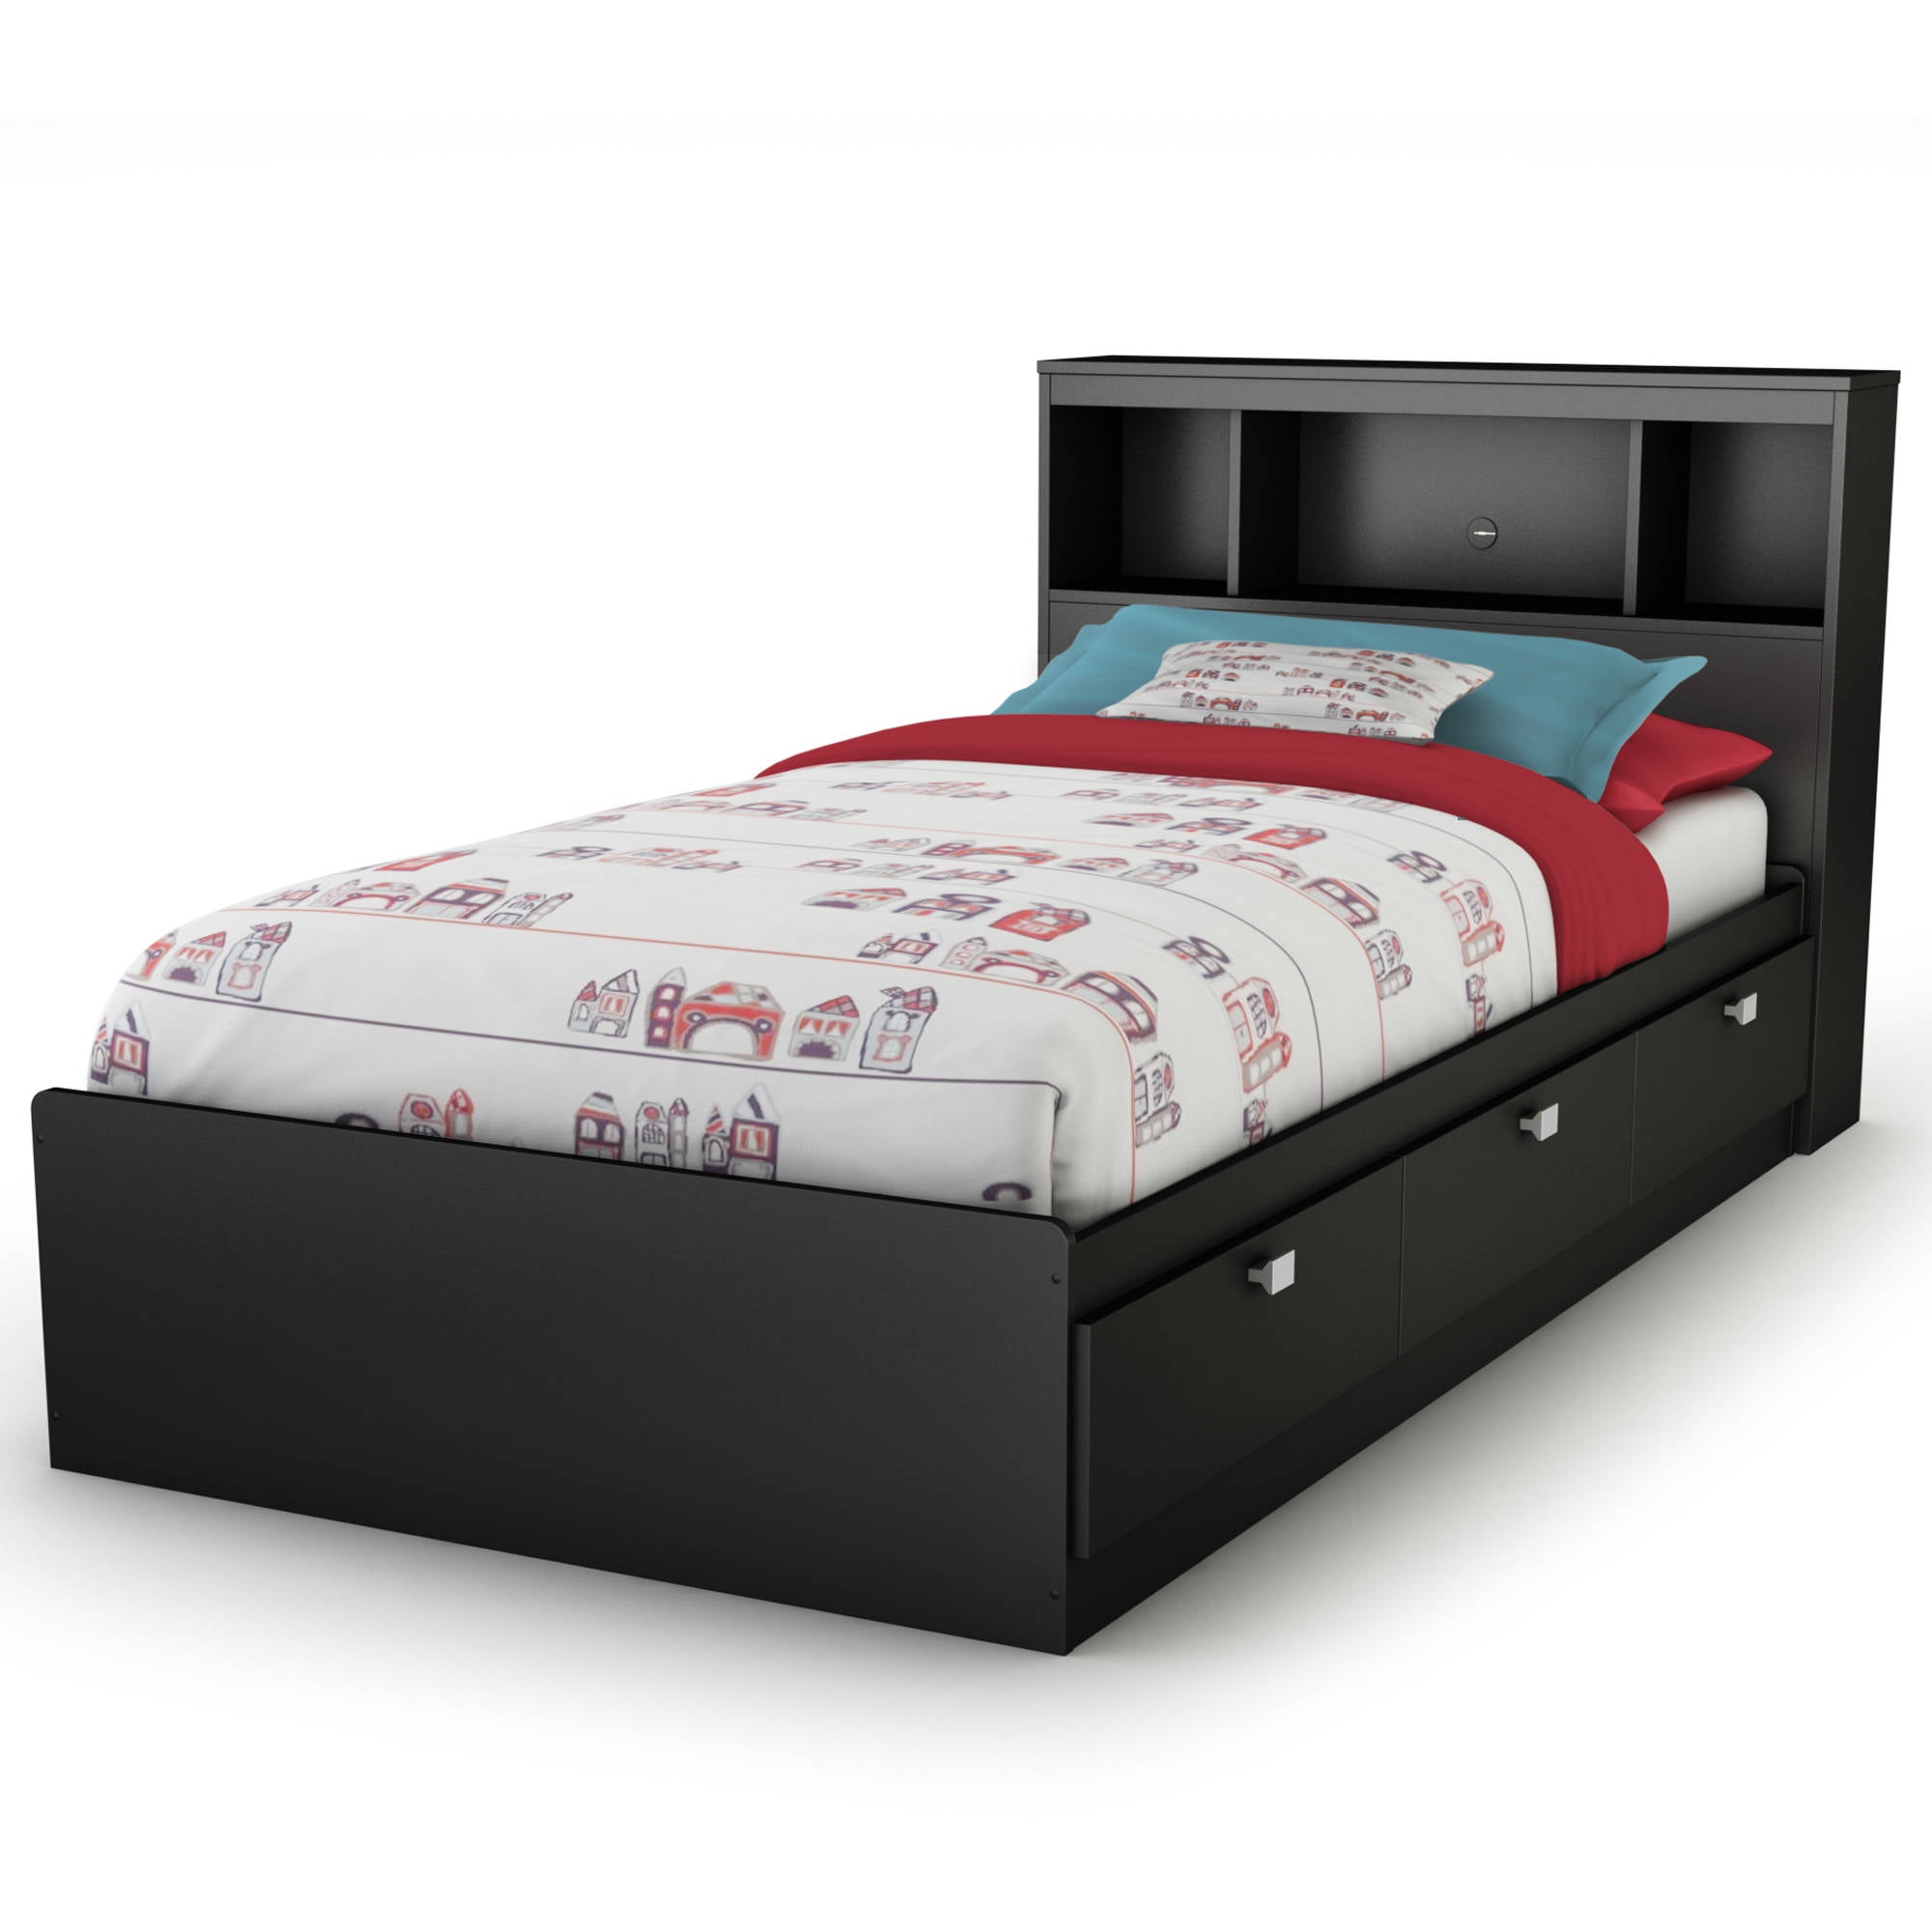 South S Spark 3 Drawer Storage Bed, How To Make A Queen Size Bookcase Headboard